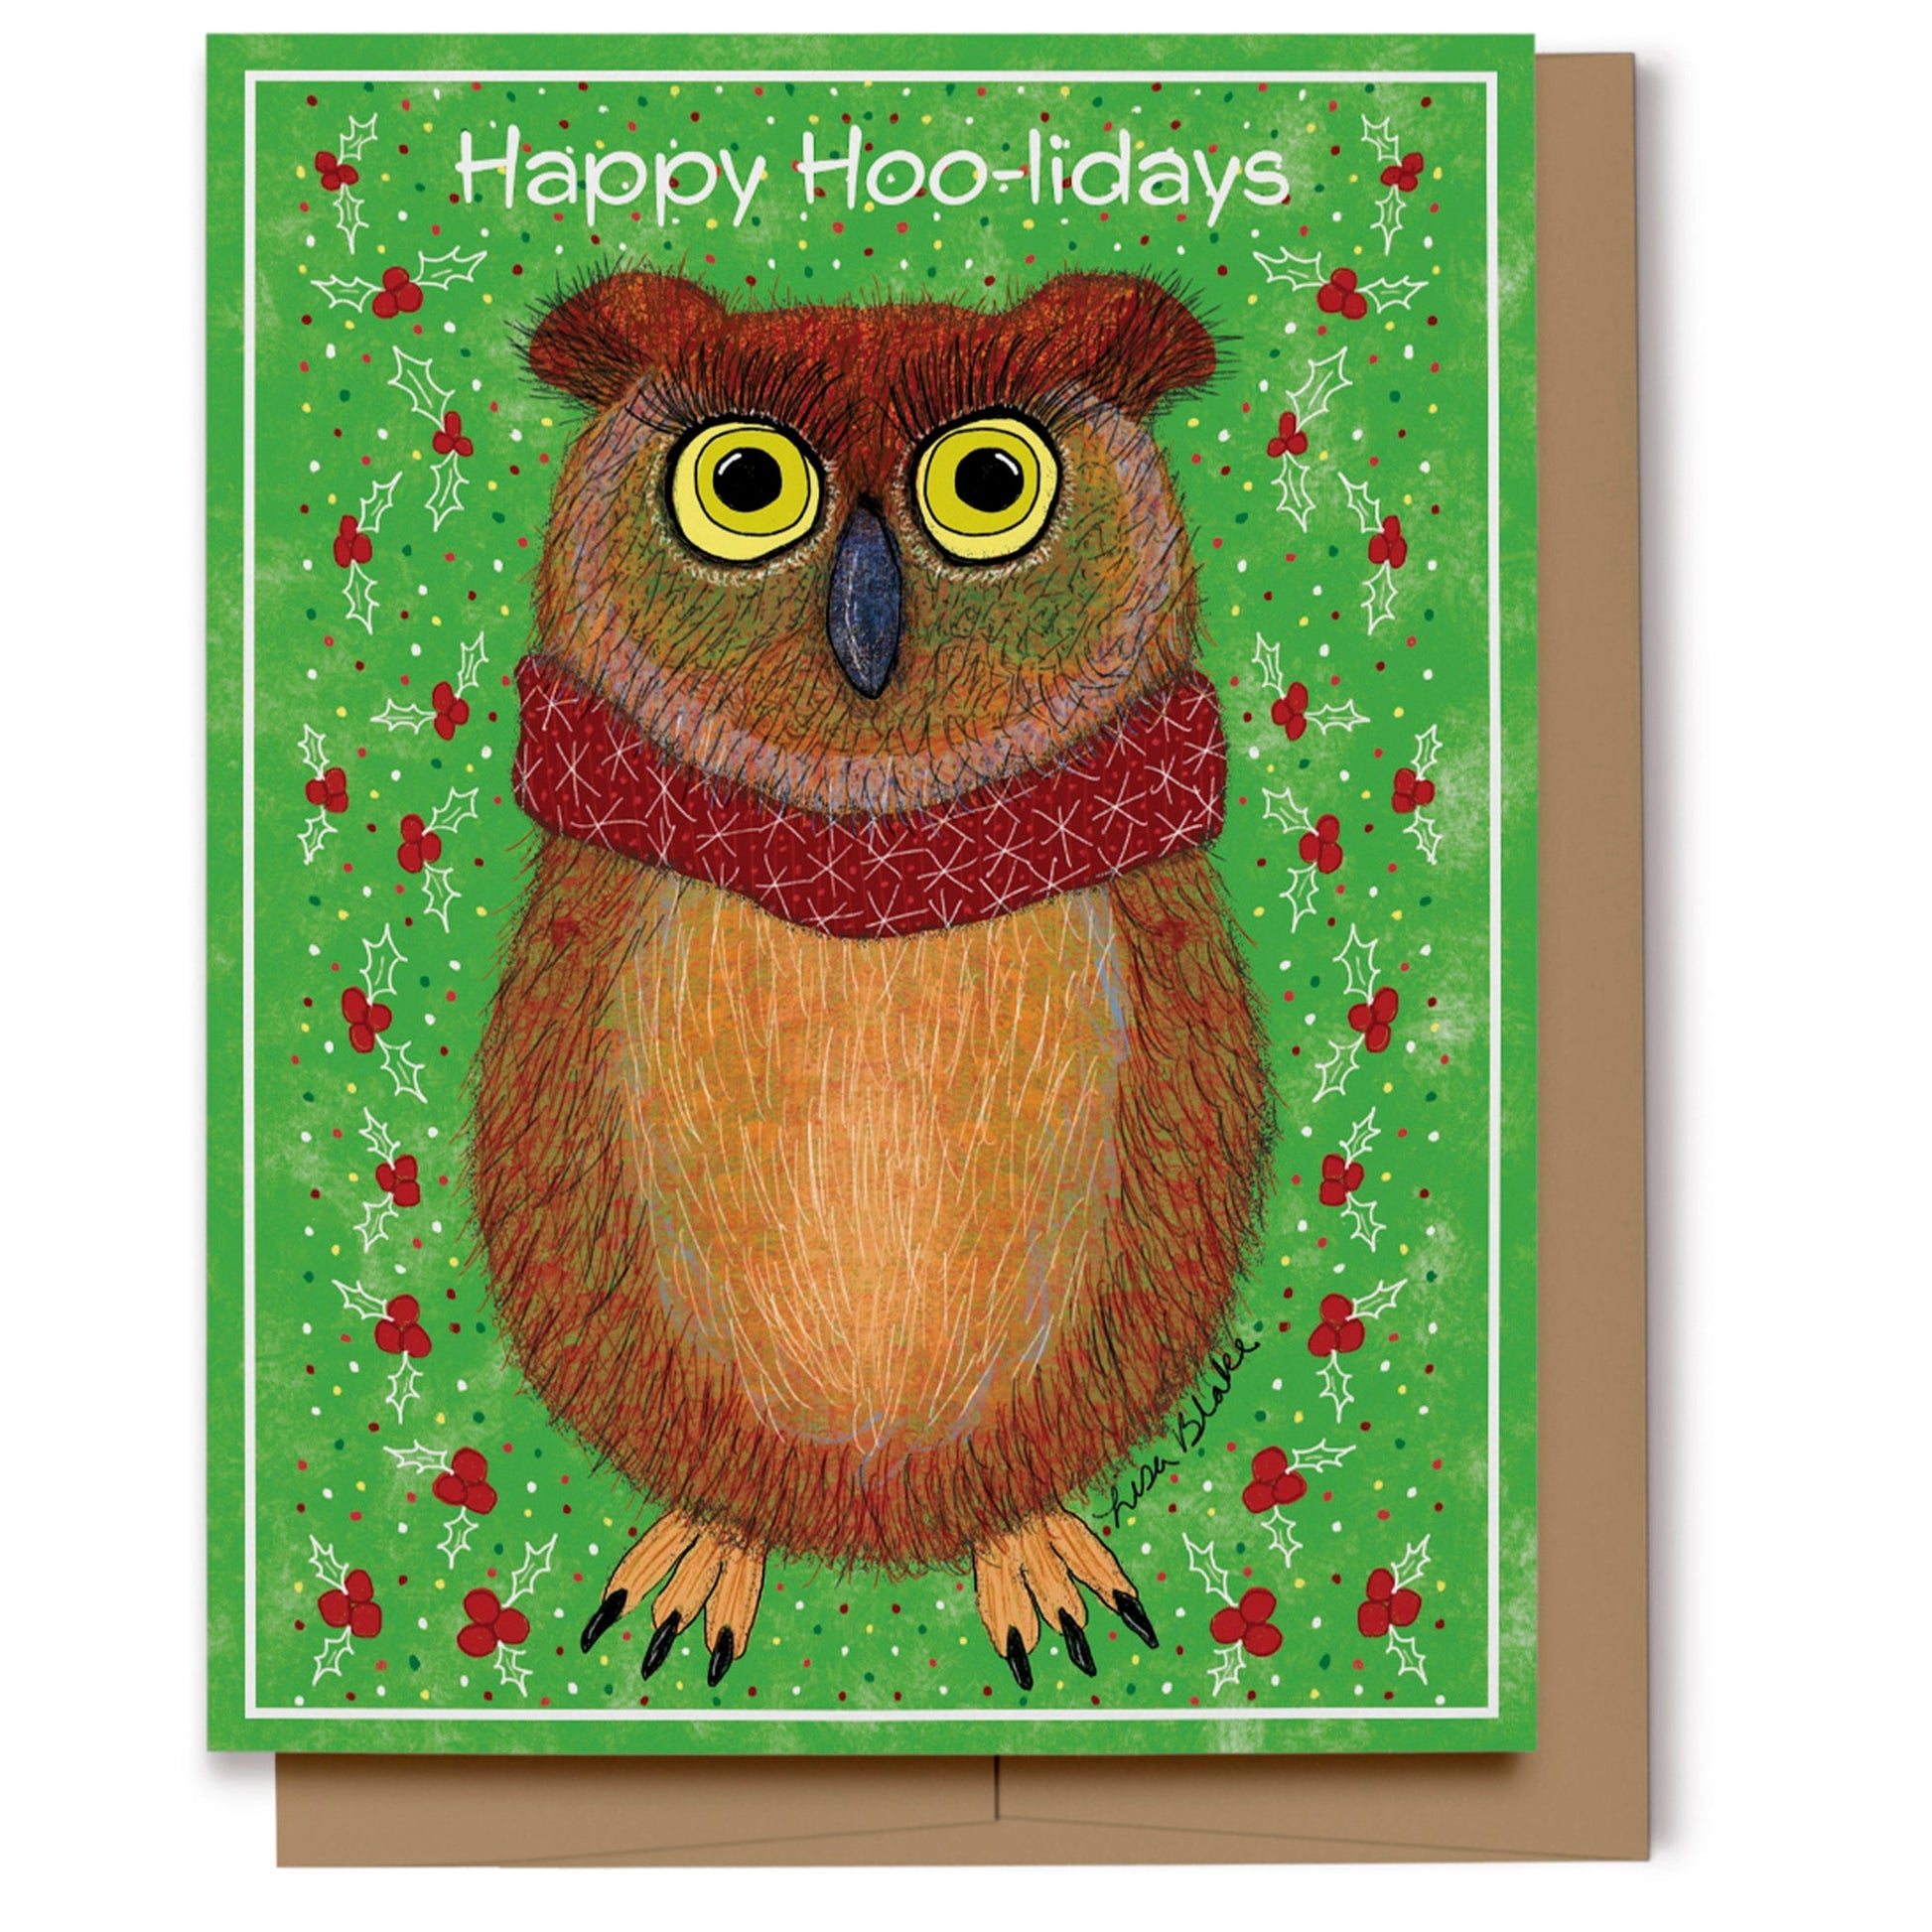 A holiday card featuring a hand drawn owl wearing a scarf on a green background with holly which reads, "Happy Hoo-lidays." Digitally hand drawn using Procreate App.